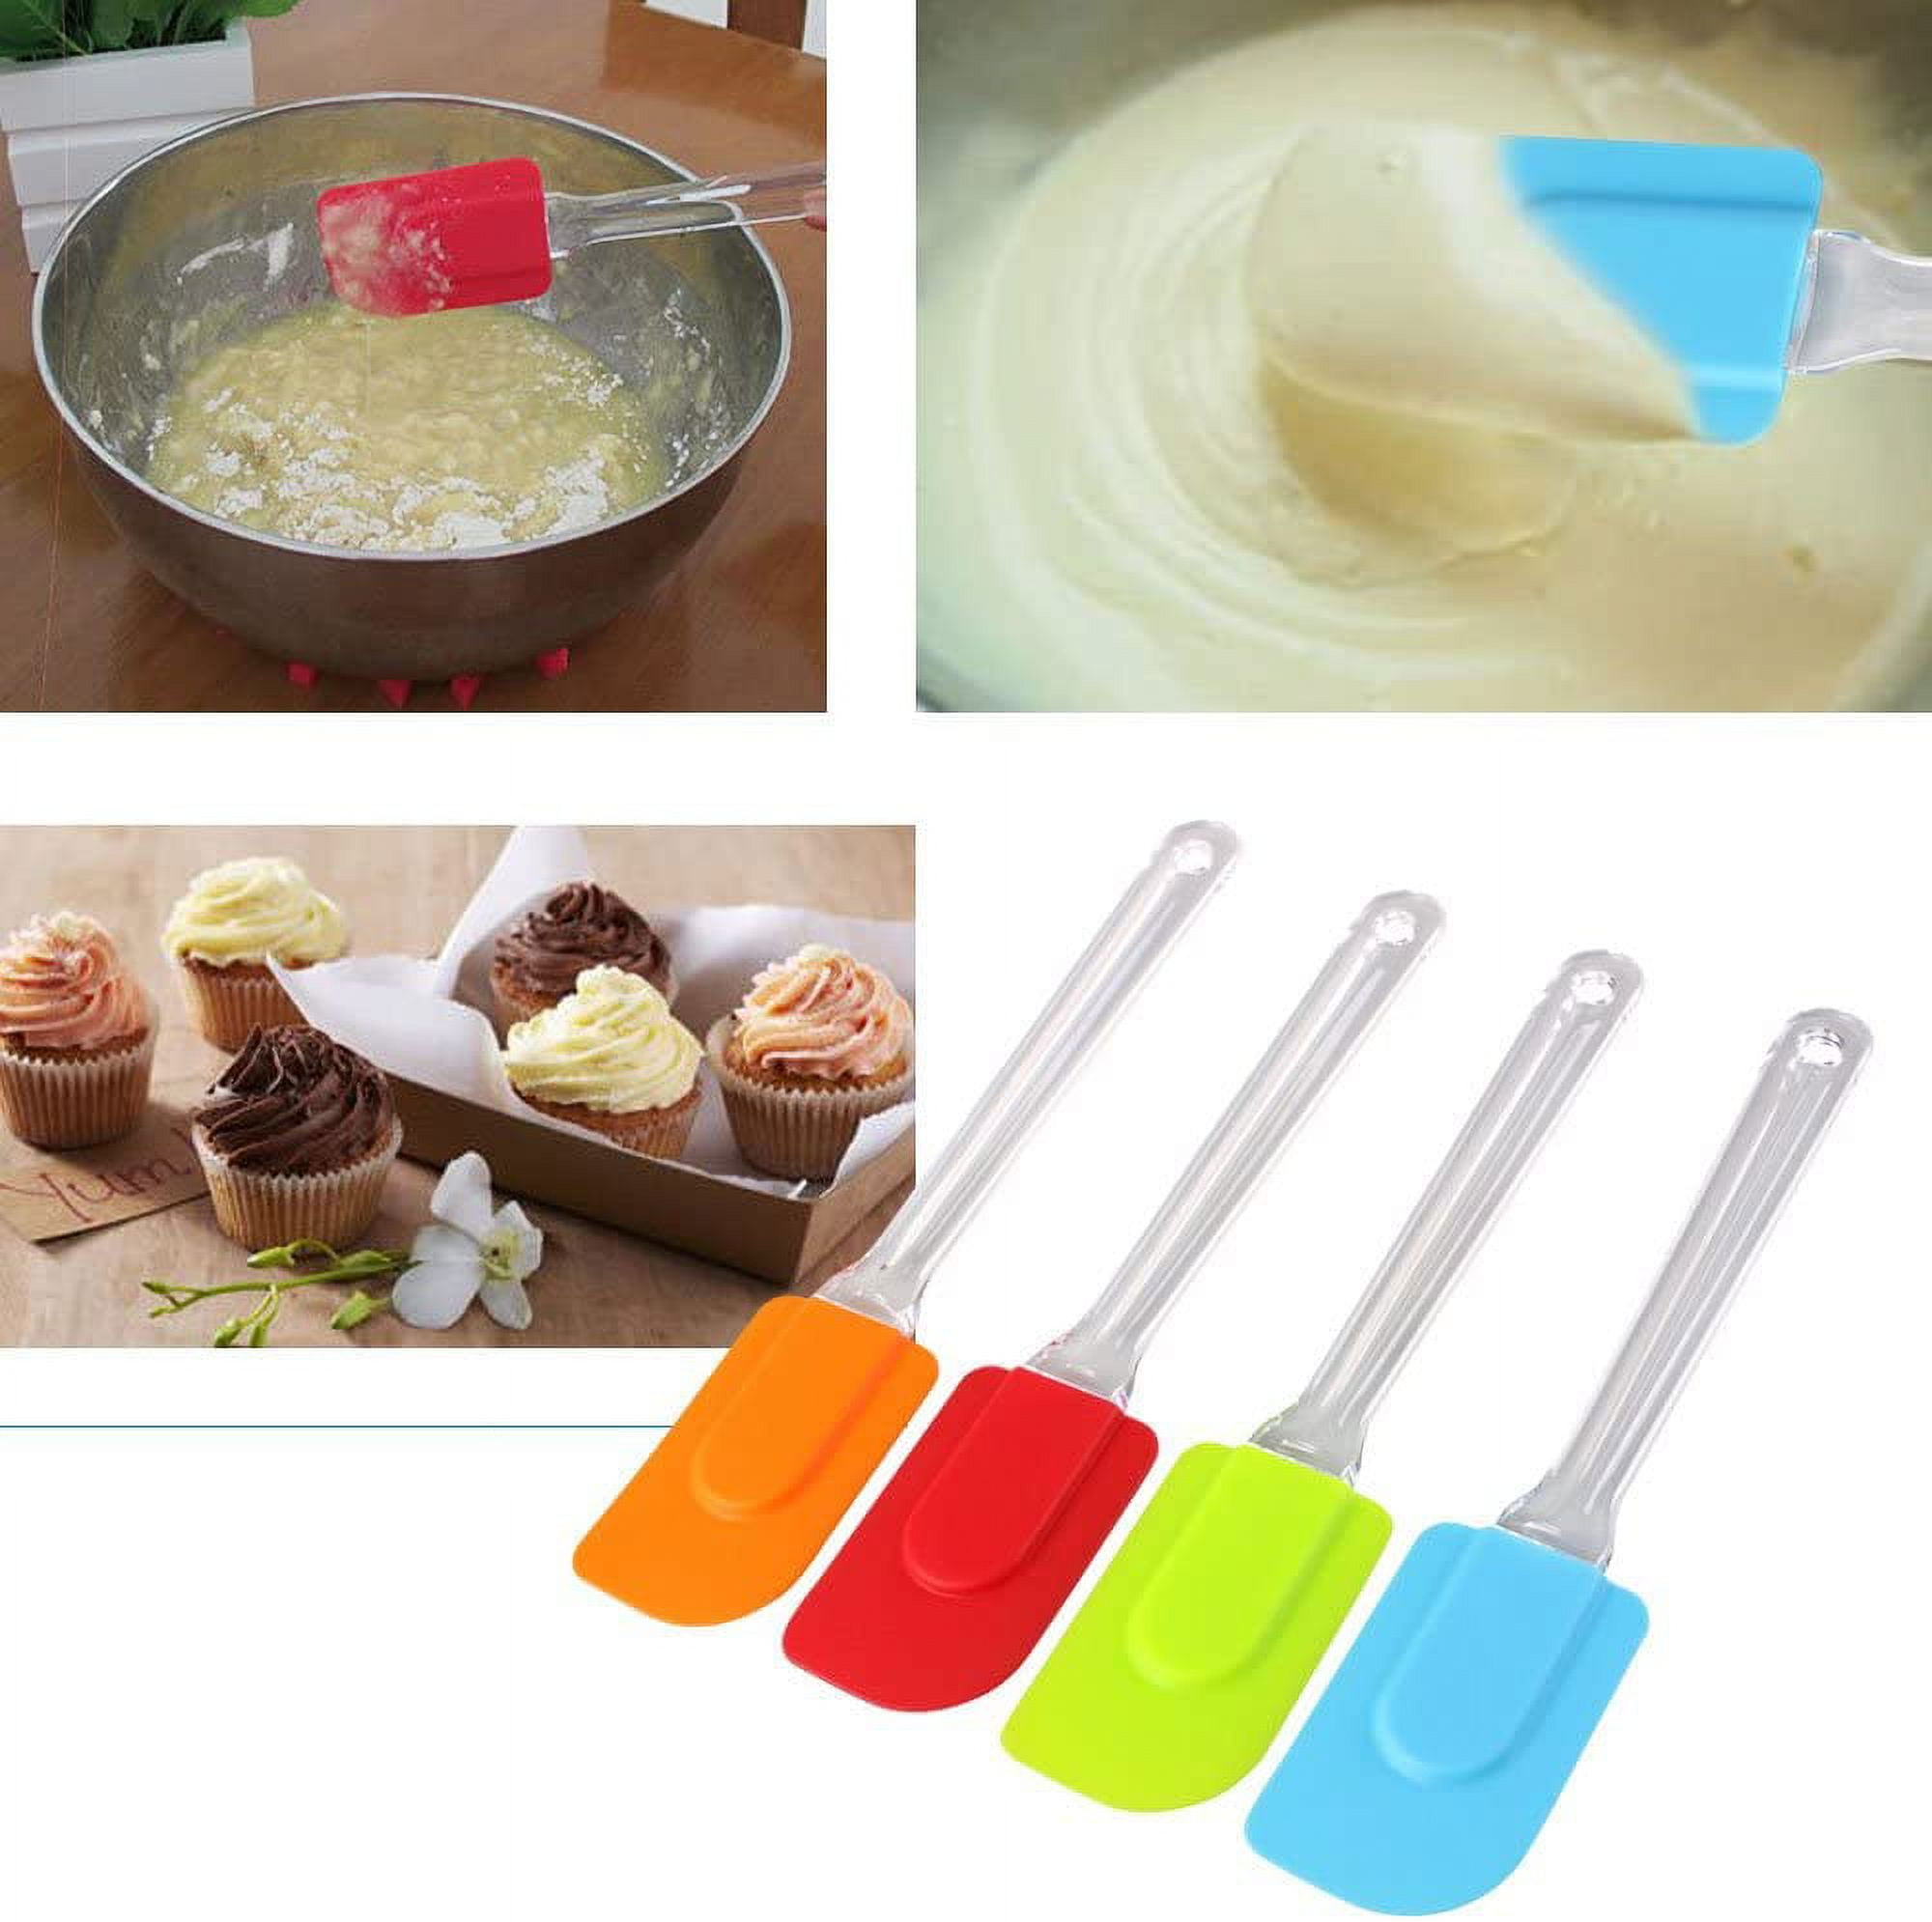 Uulki Baking Spatula Set from Rubber and Wood